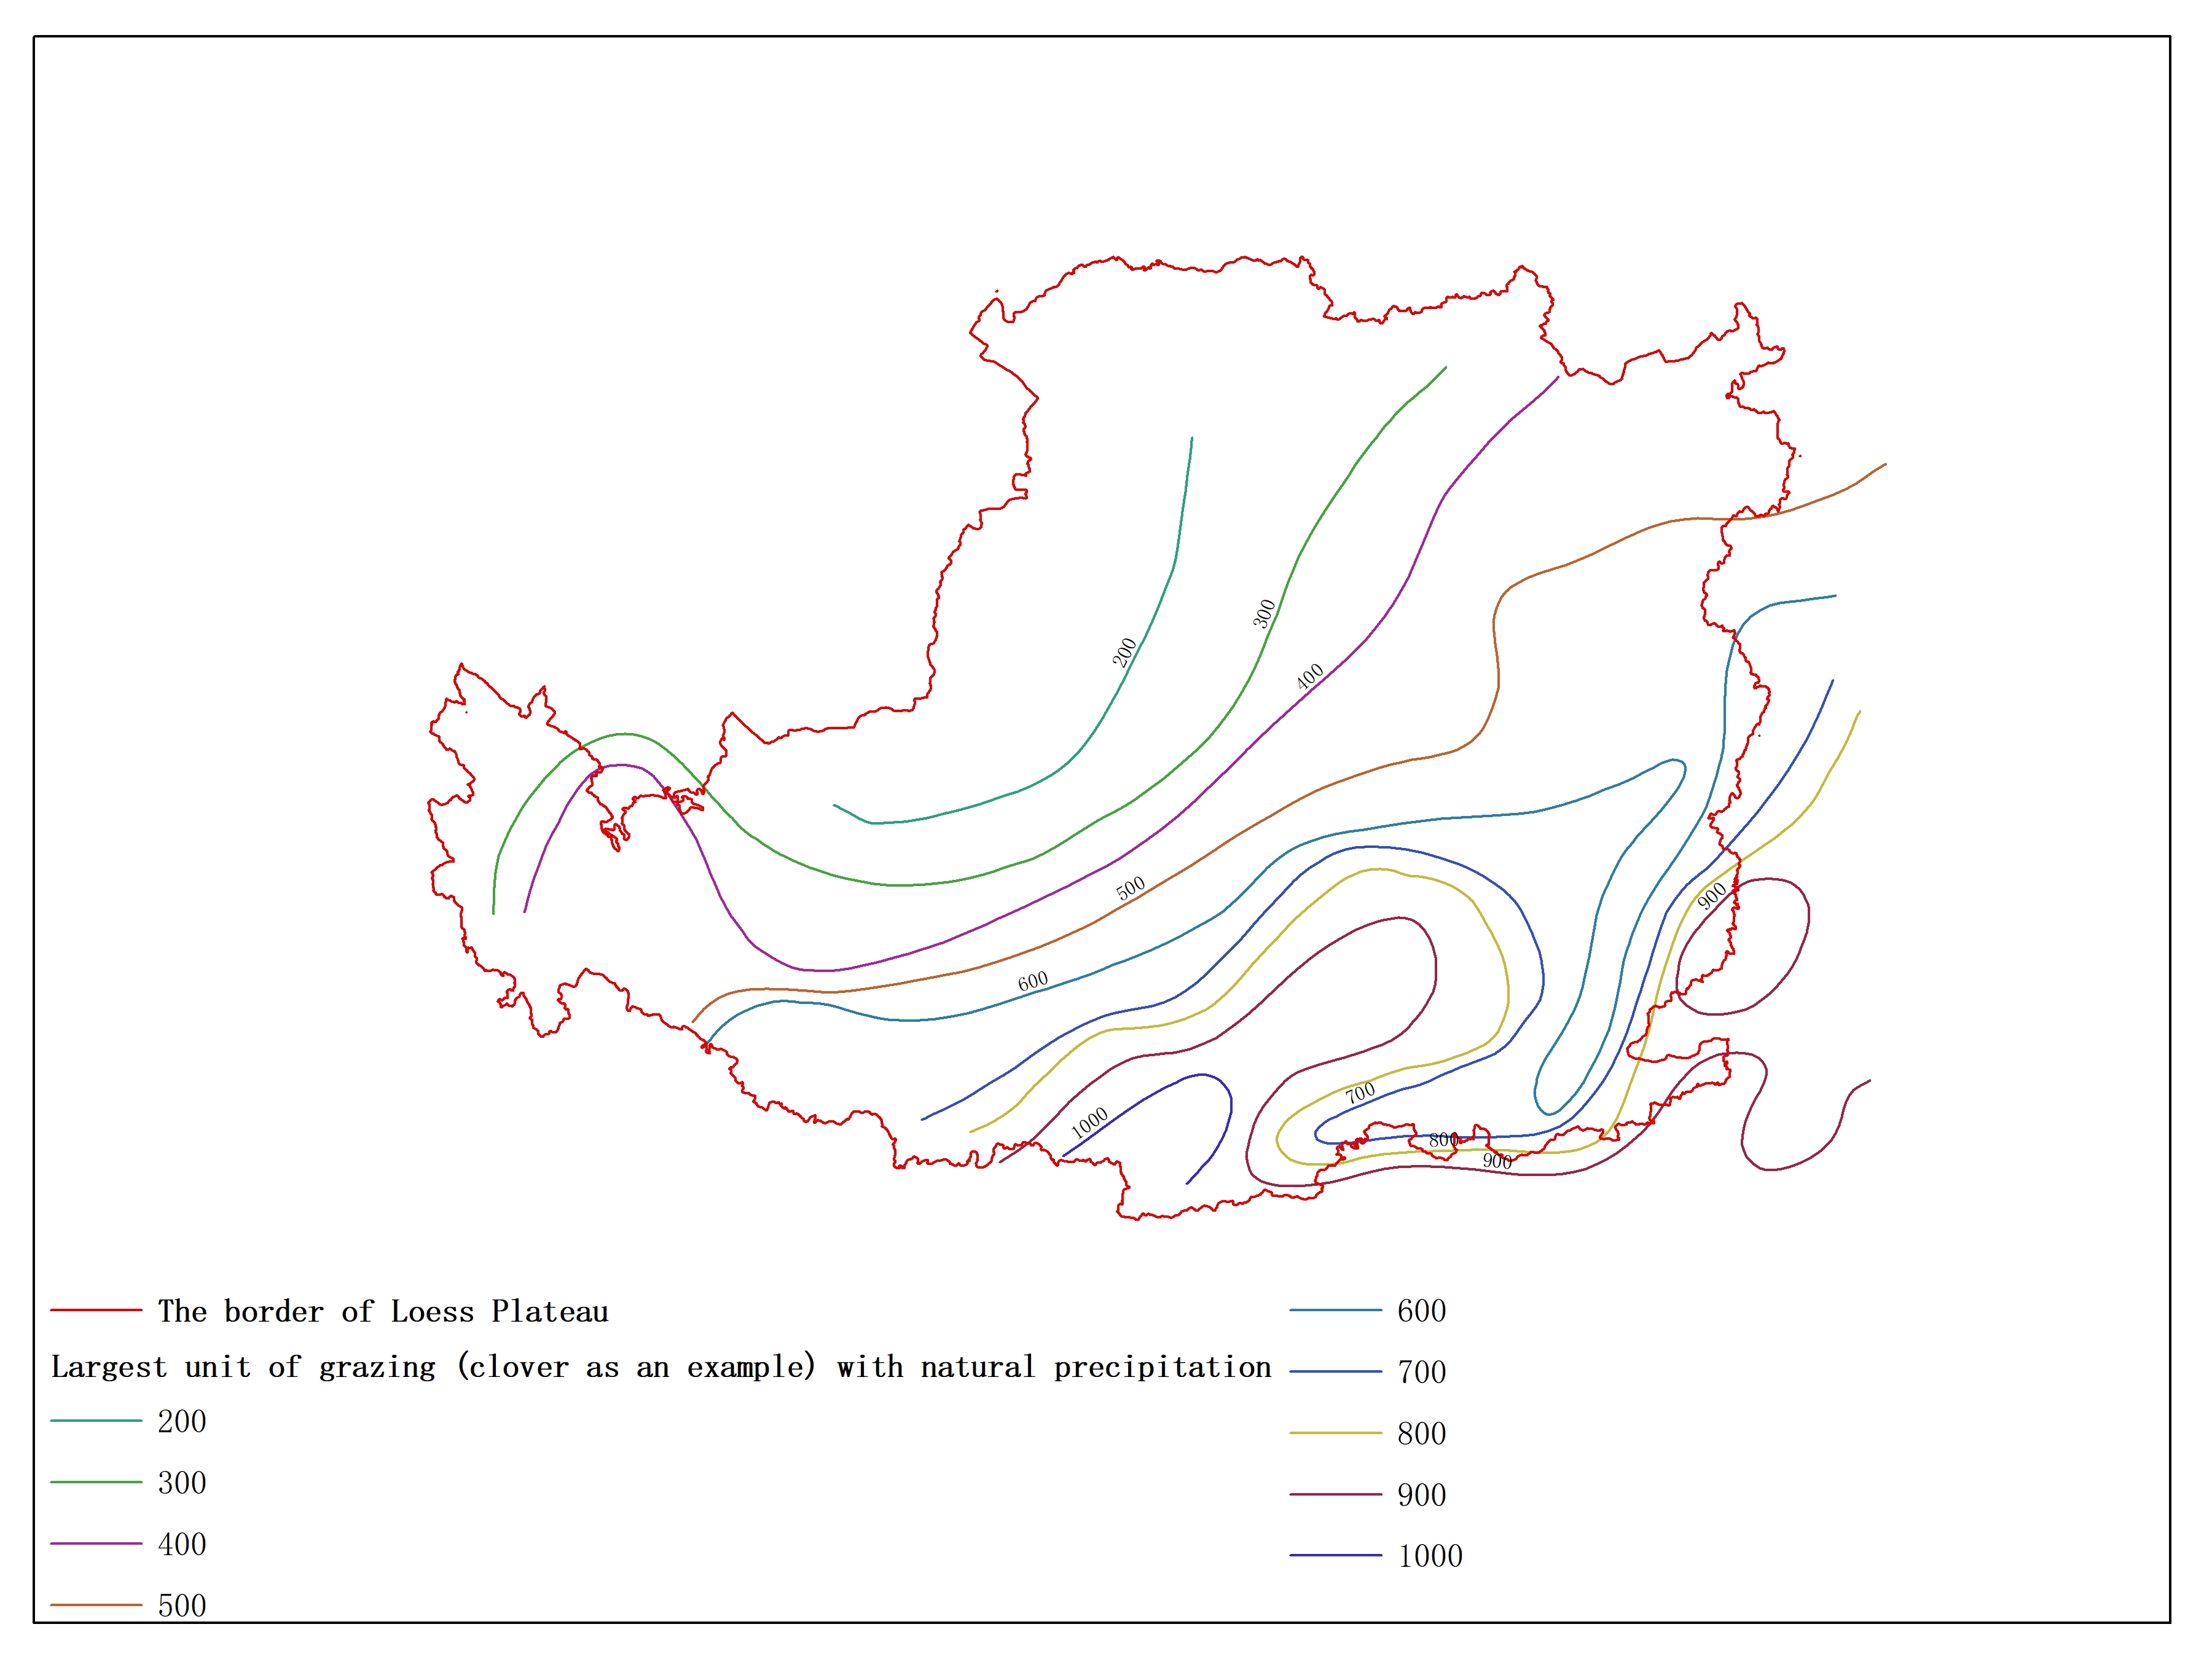 Agricultural climate resource atlas of Loess Plateau-Largest unit of grazing (clover as an example) with natural precipitation